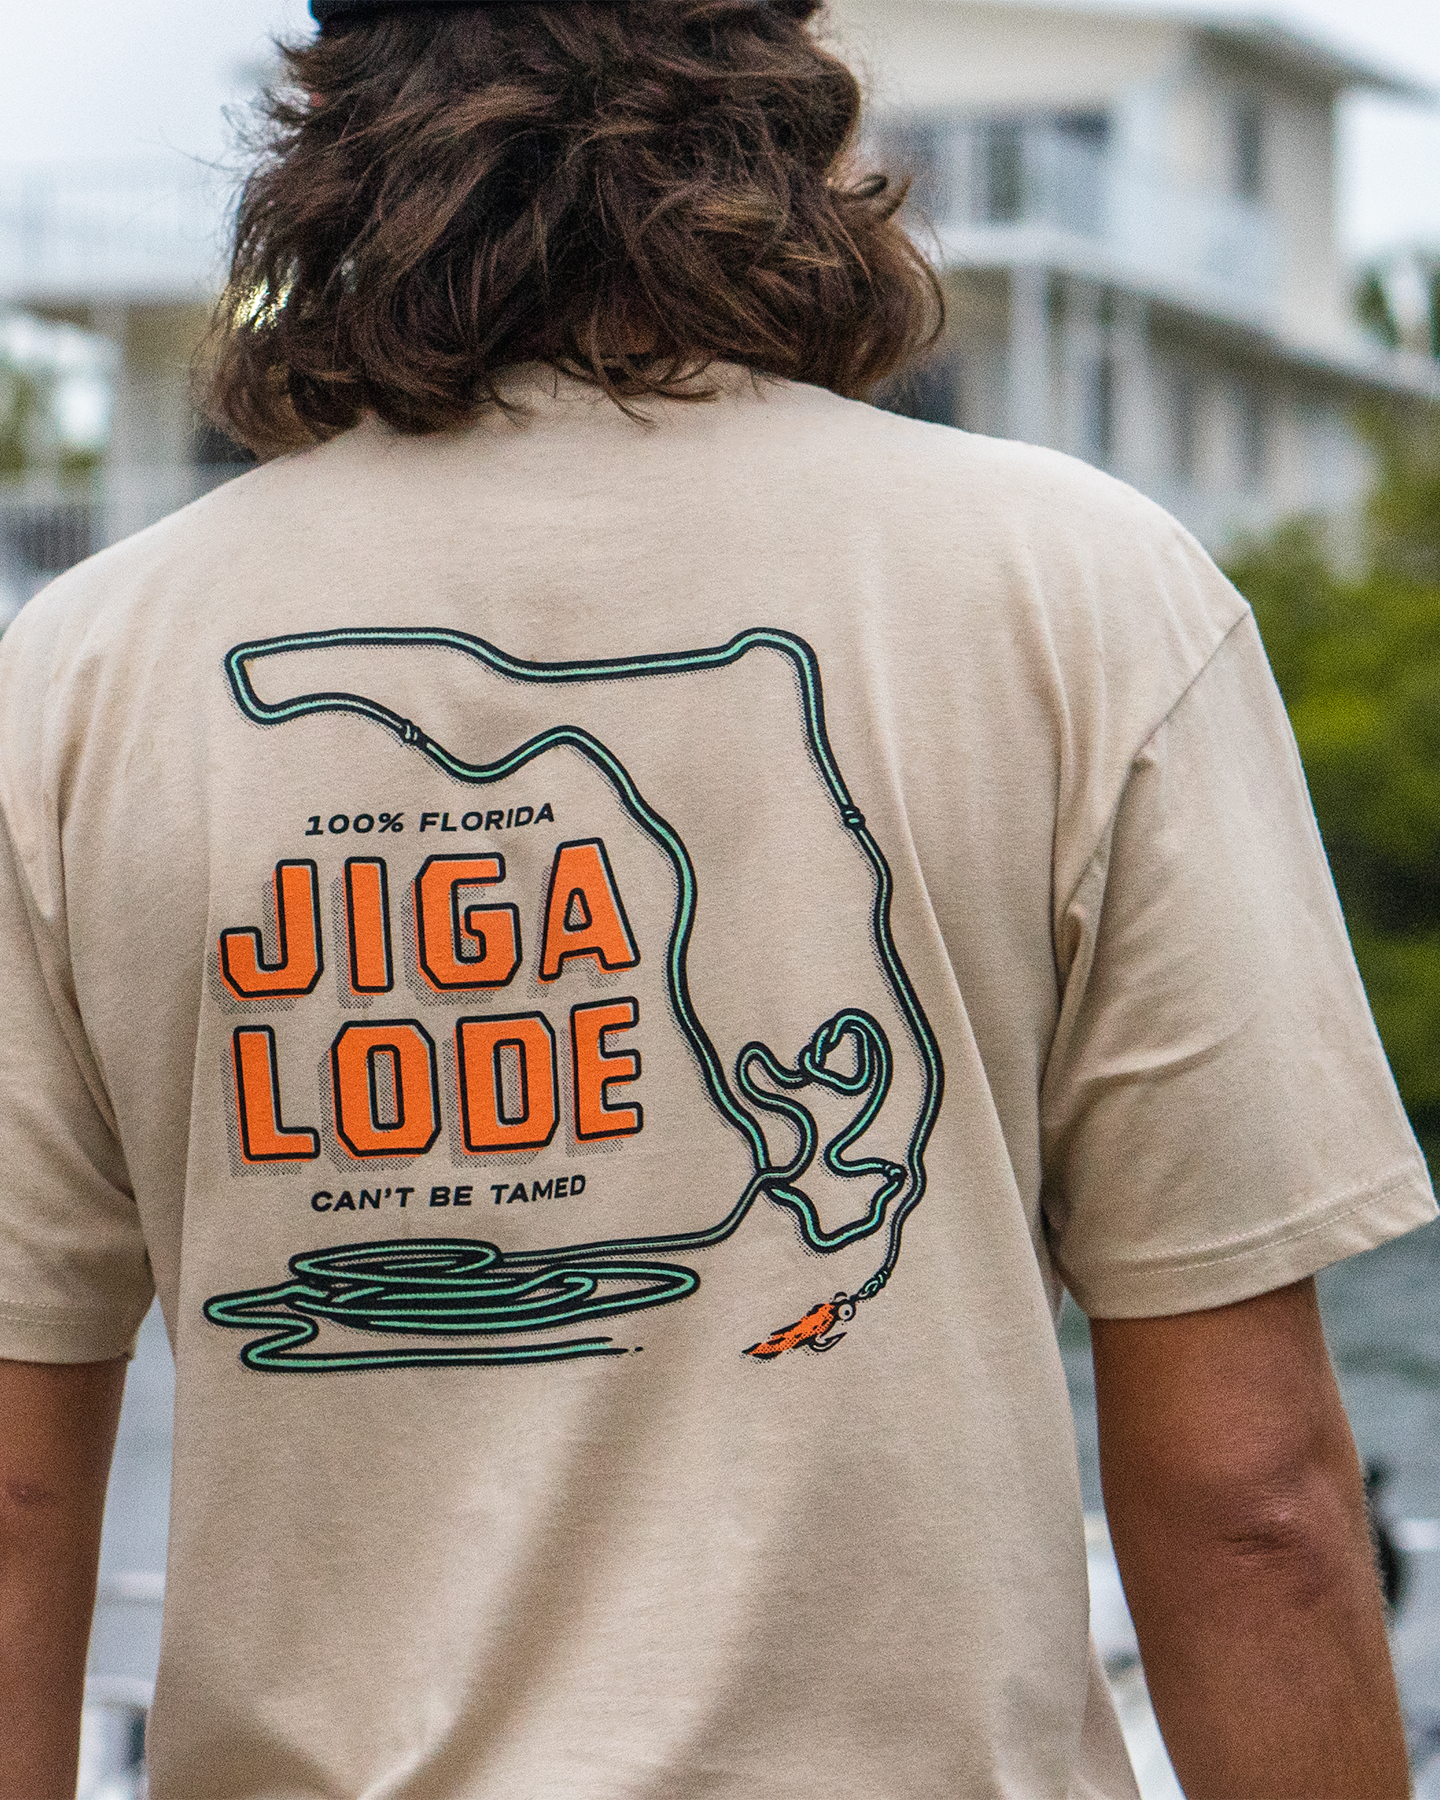 The Jigalode Florida Fly Tee. A fly fishing t-shirt in the shape of Florida 